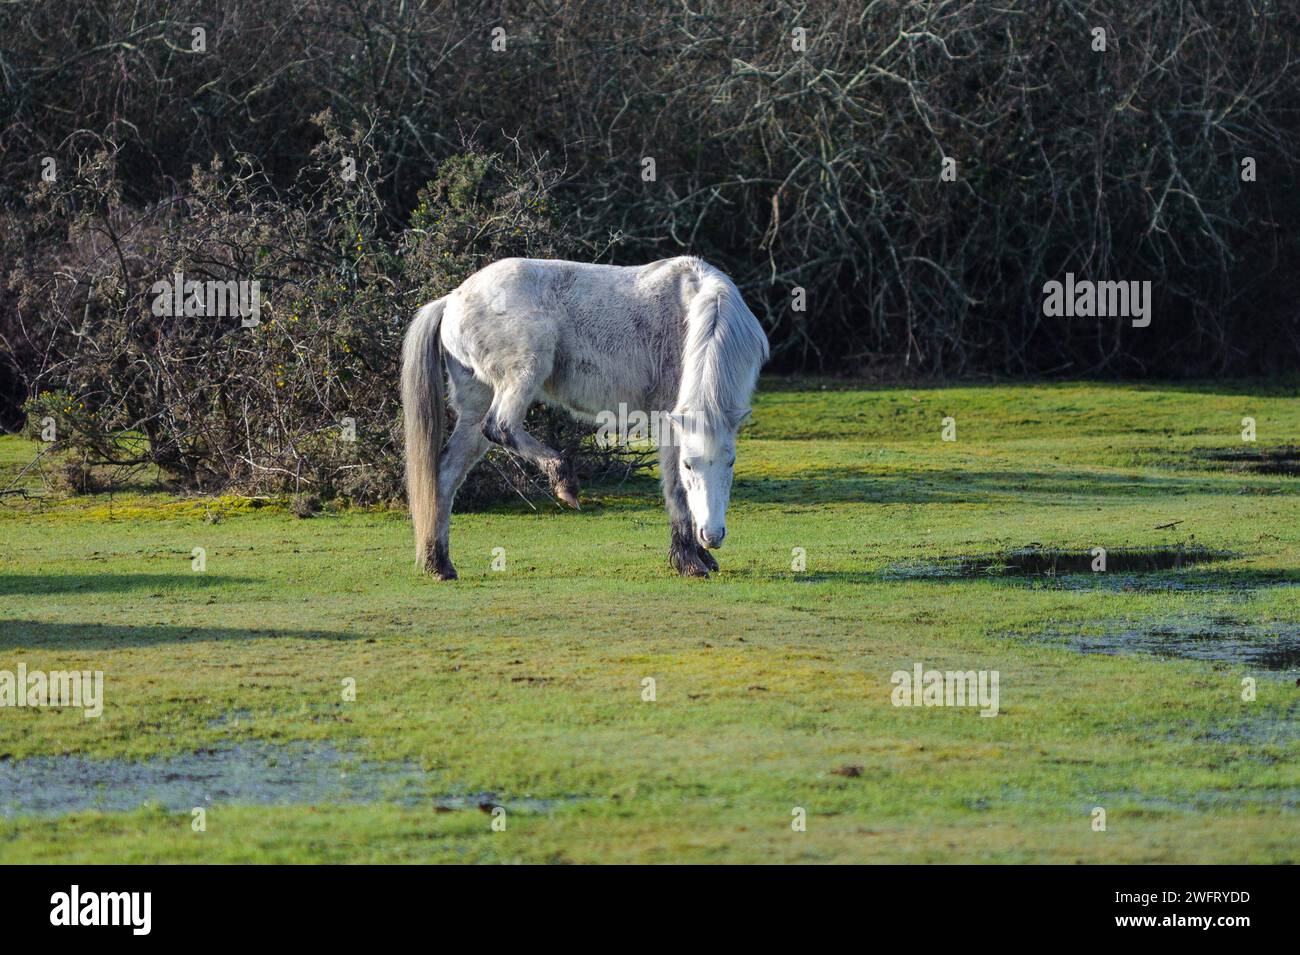 White New Forest pony with one leg lifted up Stock Photo